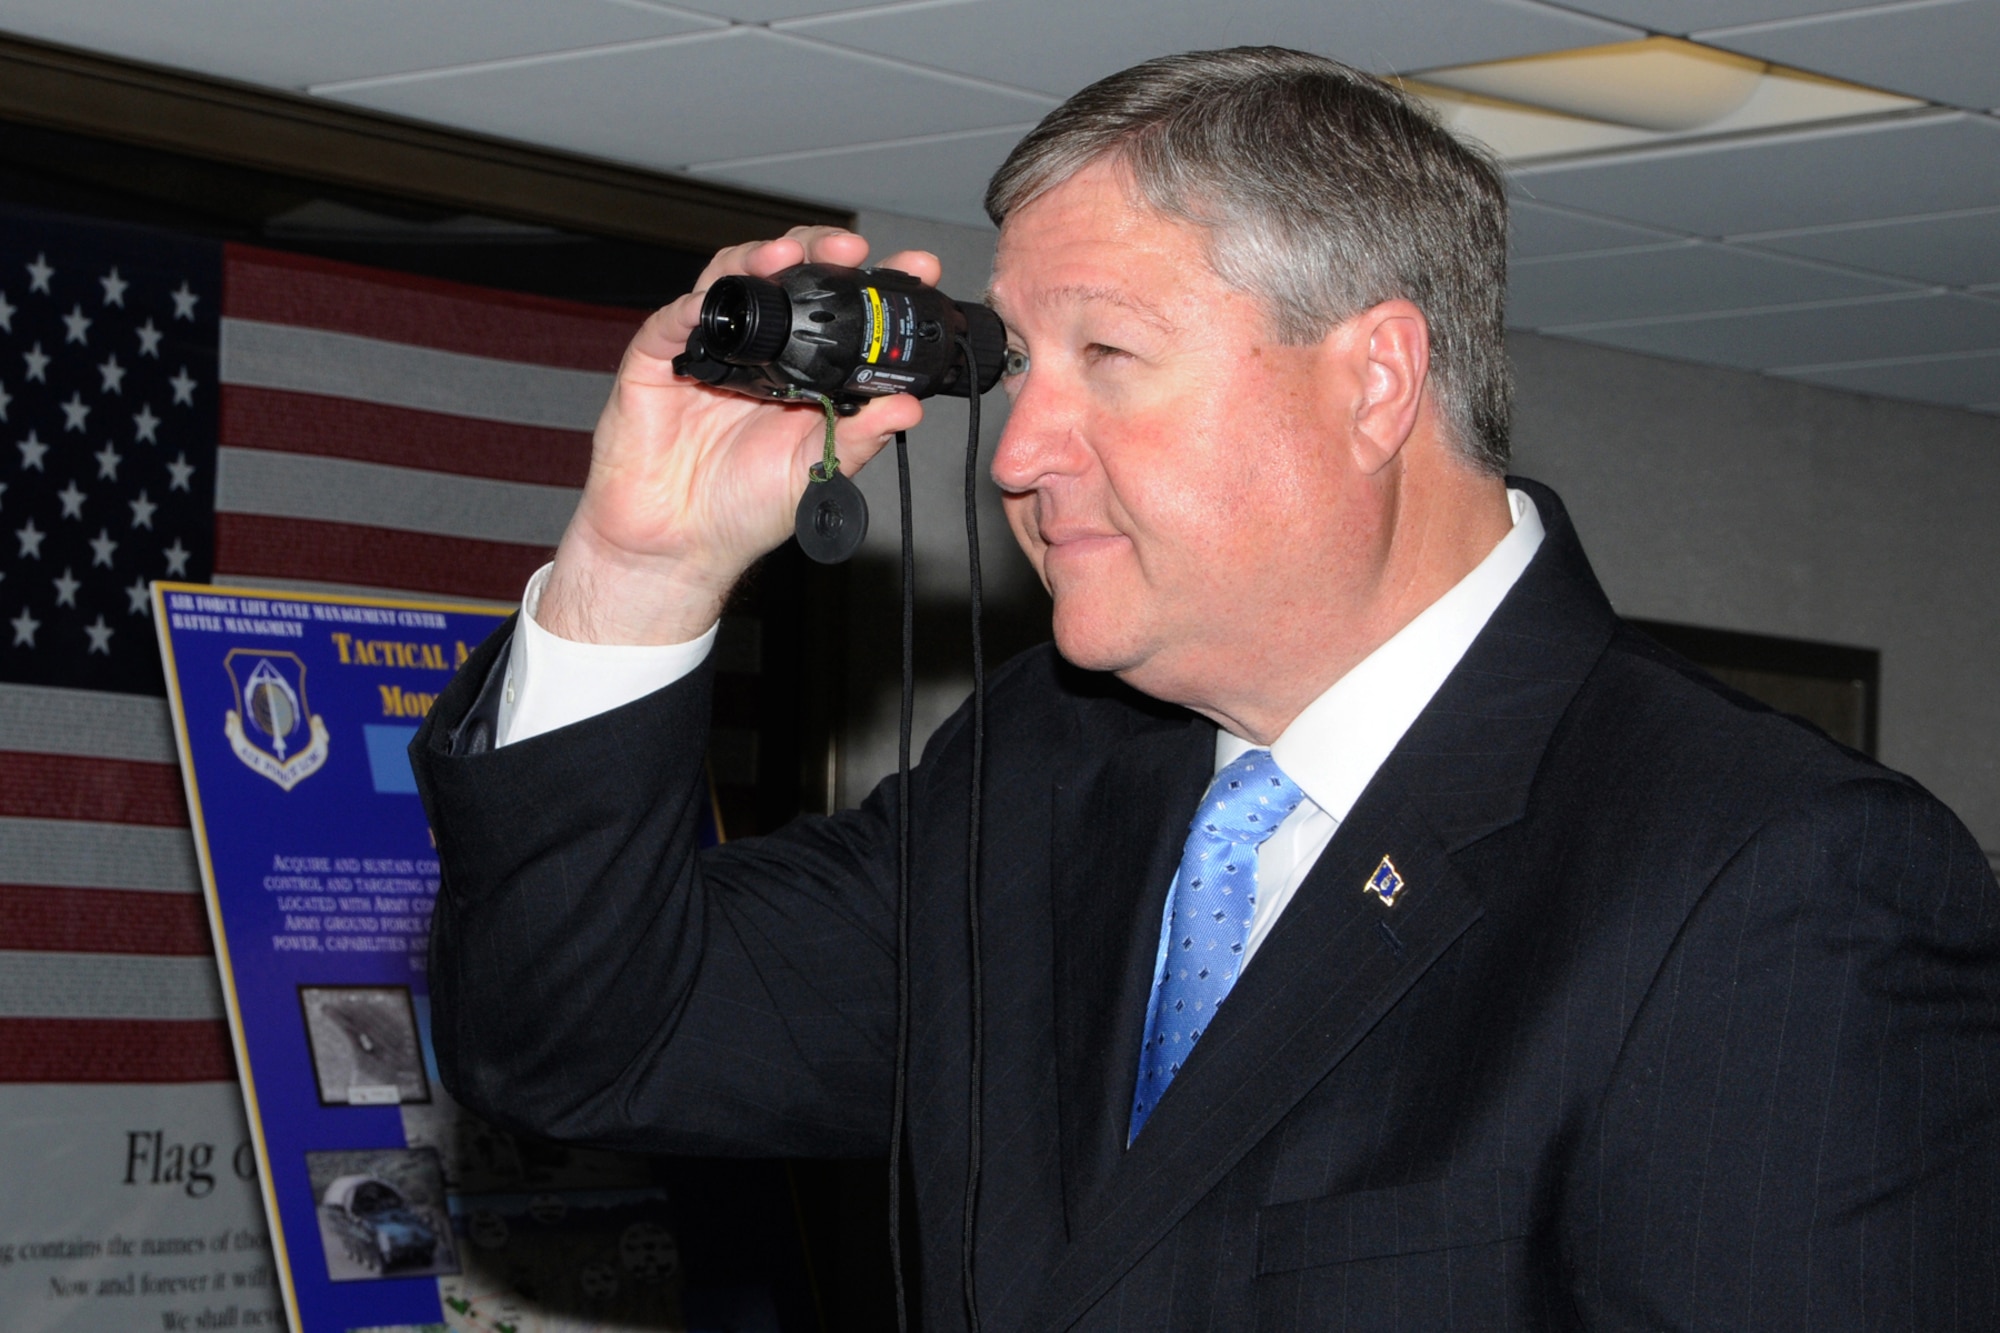 HANSCOM AIR FORCE BASE, Mass. -- Secretary of the Air Force Michael Donley checks out the Mini-Thermal Monocular device acquired by program managers here and used by Air Force Tactical Air Control Party members to view thermal imagery and mark targets during his visit here April 25. During his visit, the secretary also met with military and civilian award winners and held an Airman's call with base personnel, thanking Hanscom members for their contributions to providing innovative technology to Airmen around the world. (U.S. Air Force Photo by Linda LaBonte Britt)